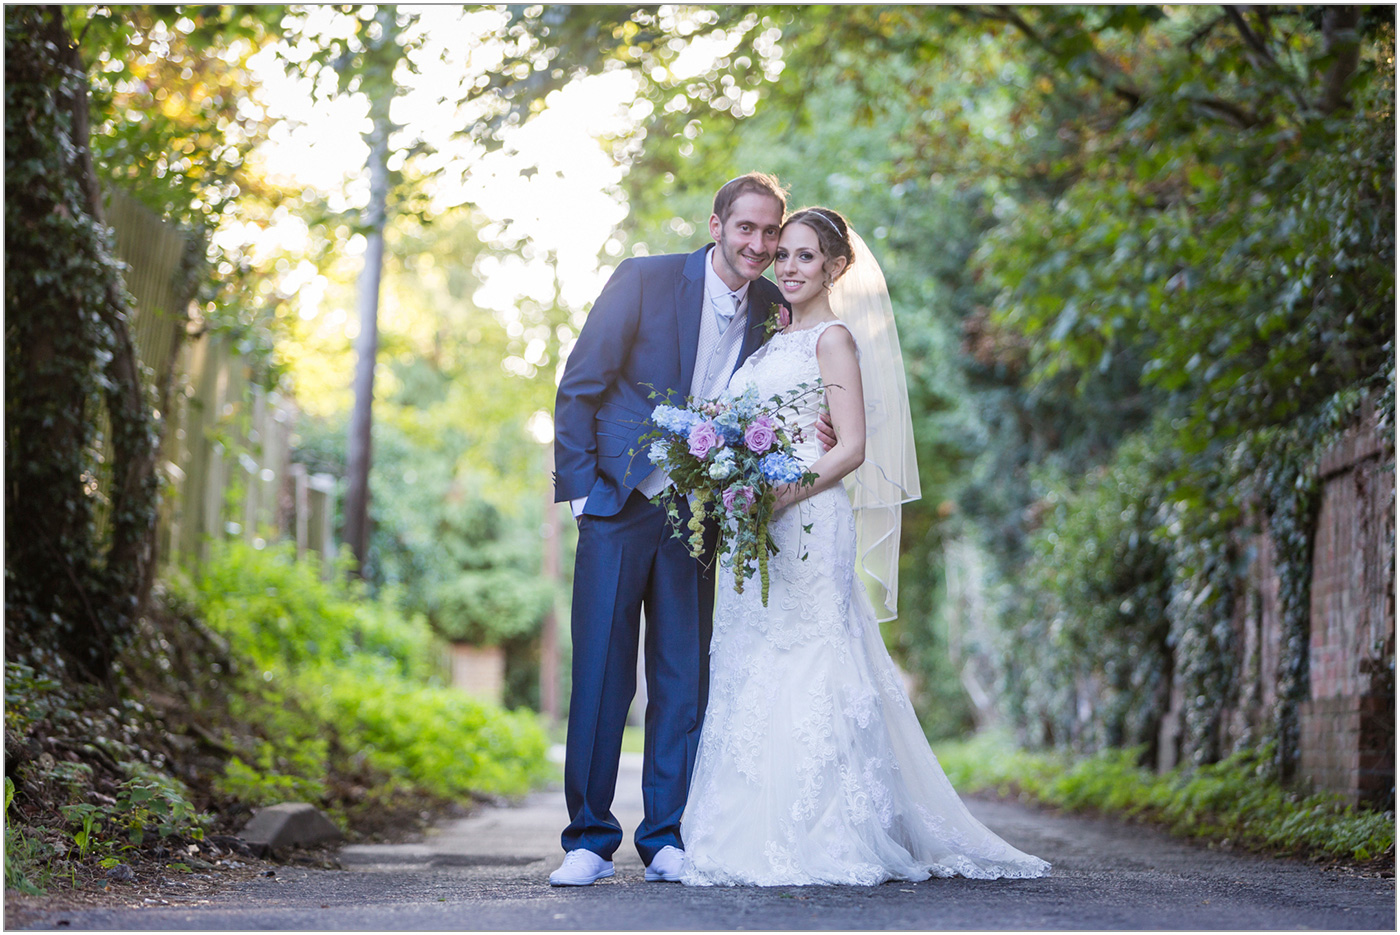 Weddings at The Olde Bell, Hurley | Mia and Saul